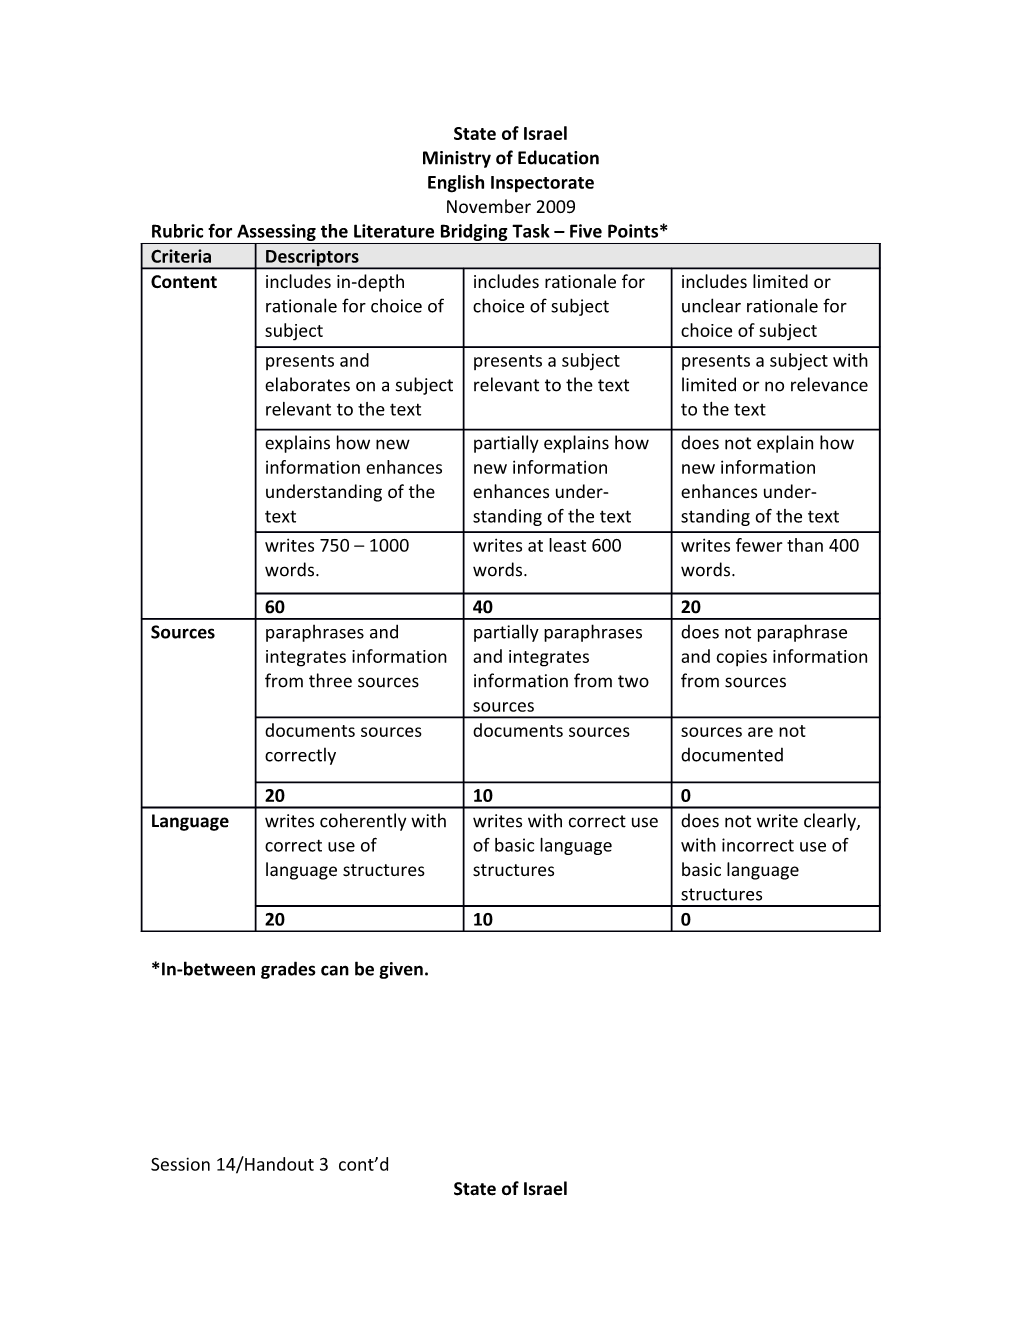 Rubric for Assessing the Literature Bridging Task Five Points*